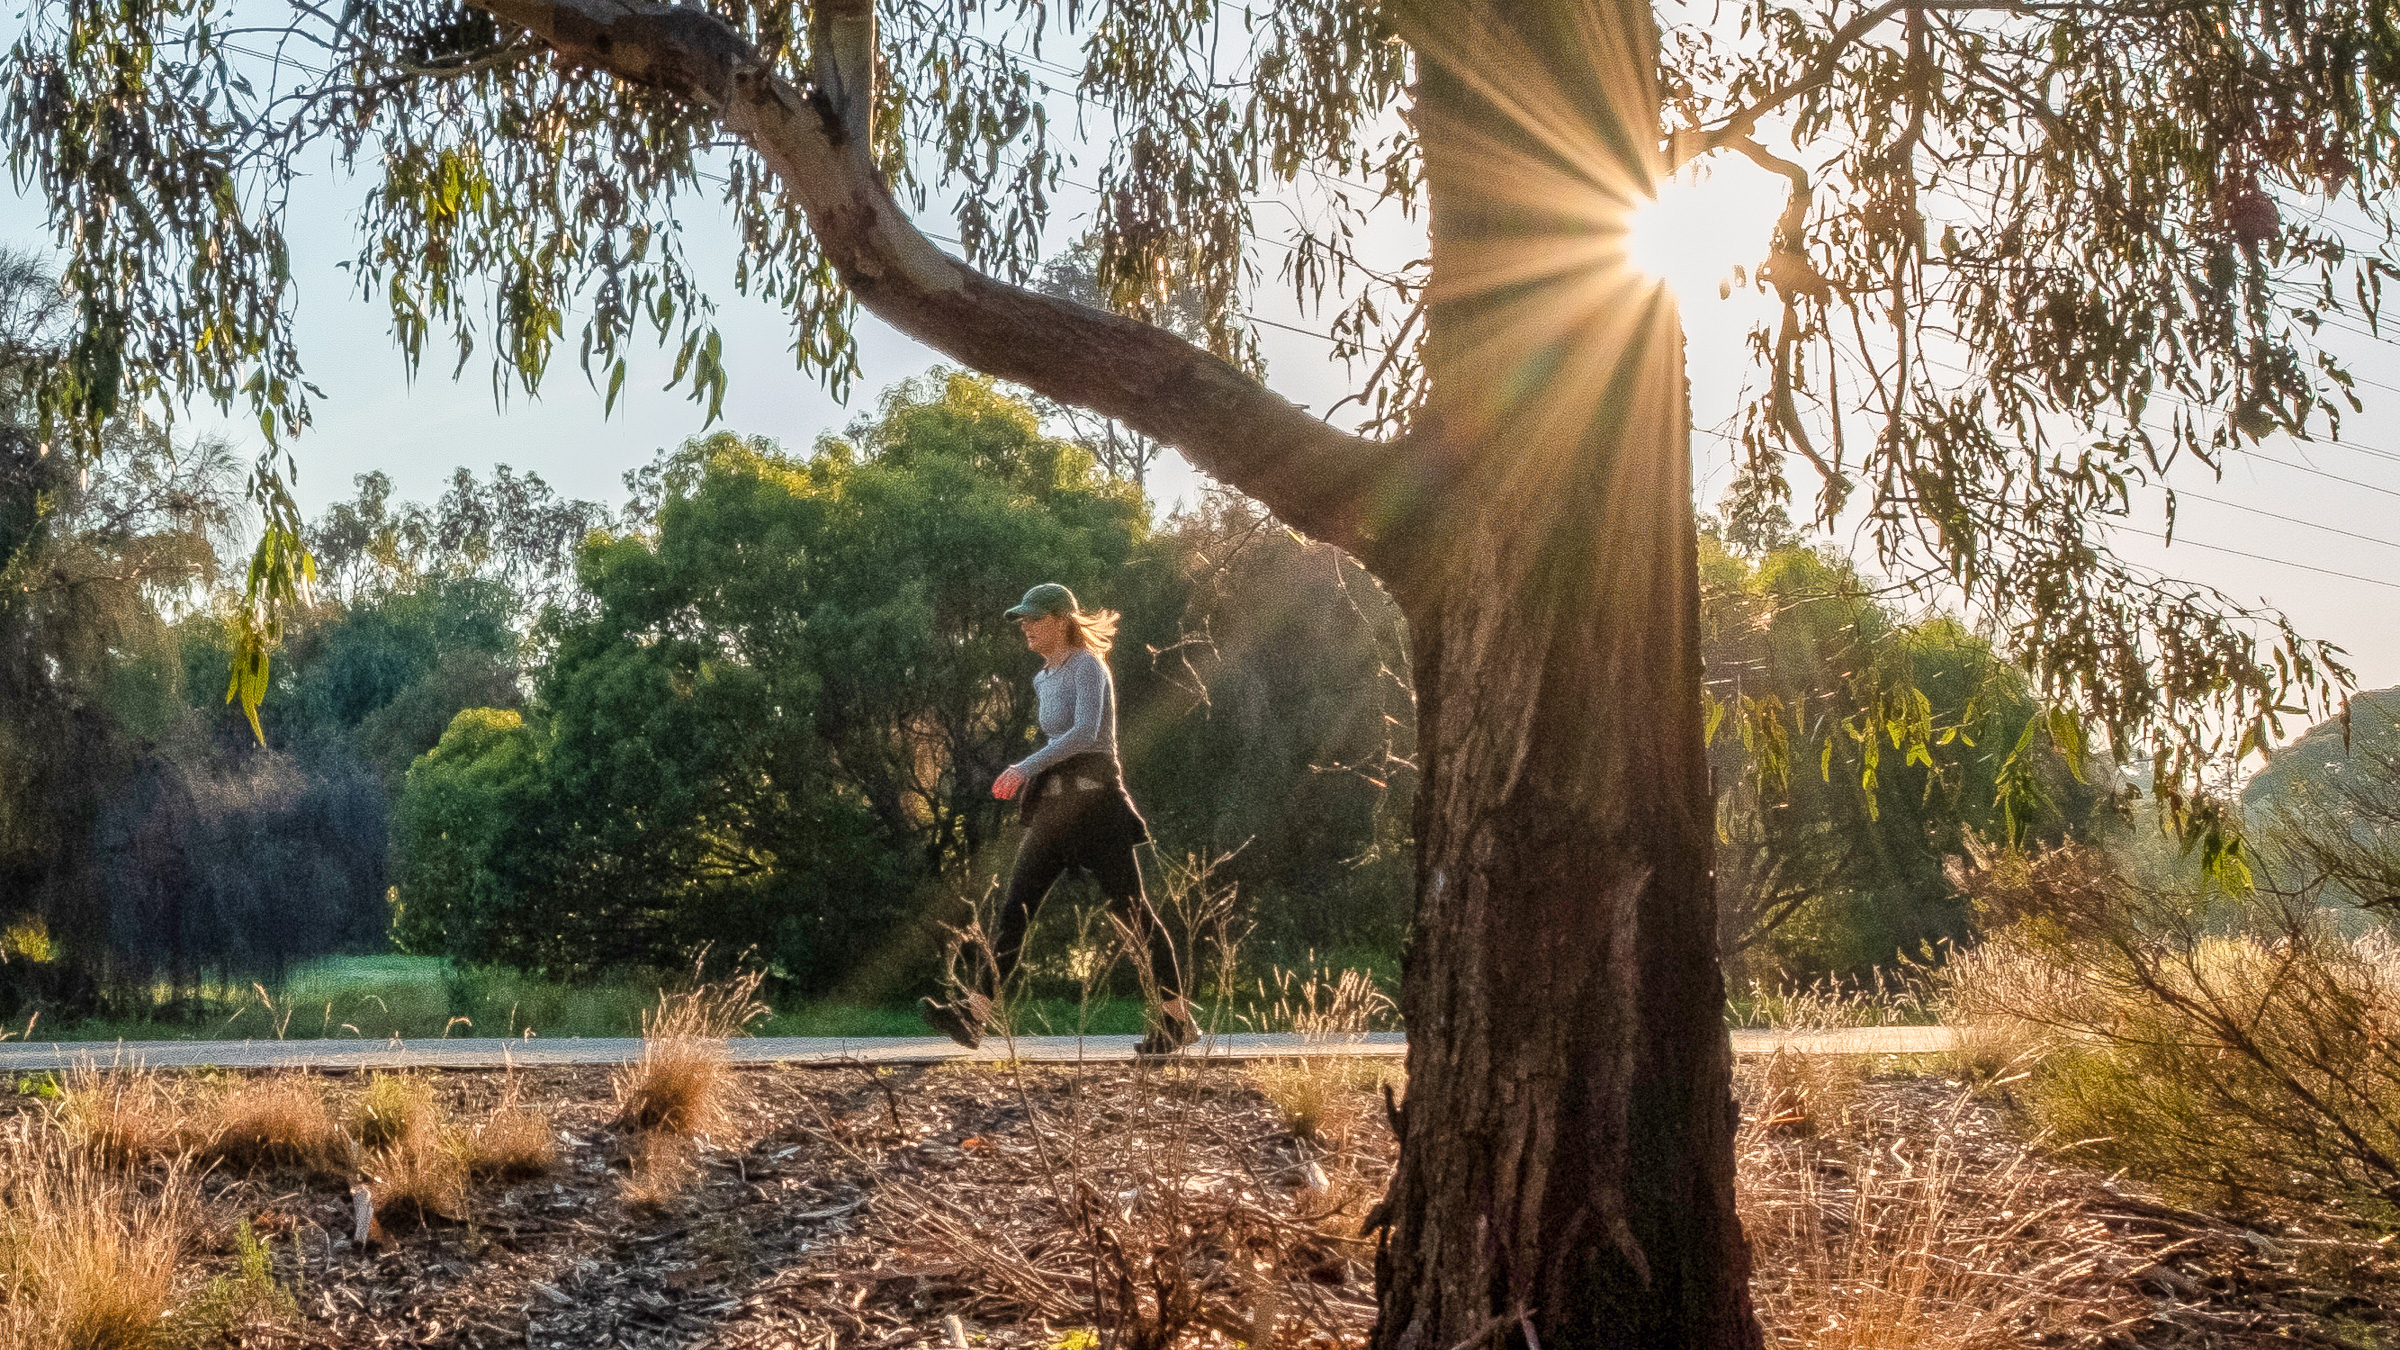 Image of person walking in local bushland setting with sun beaming through treats